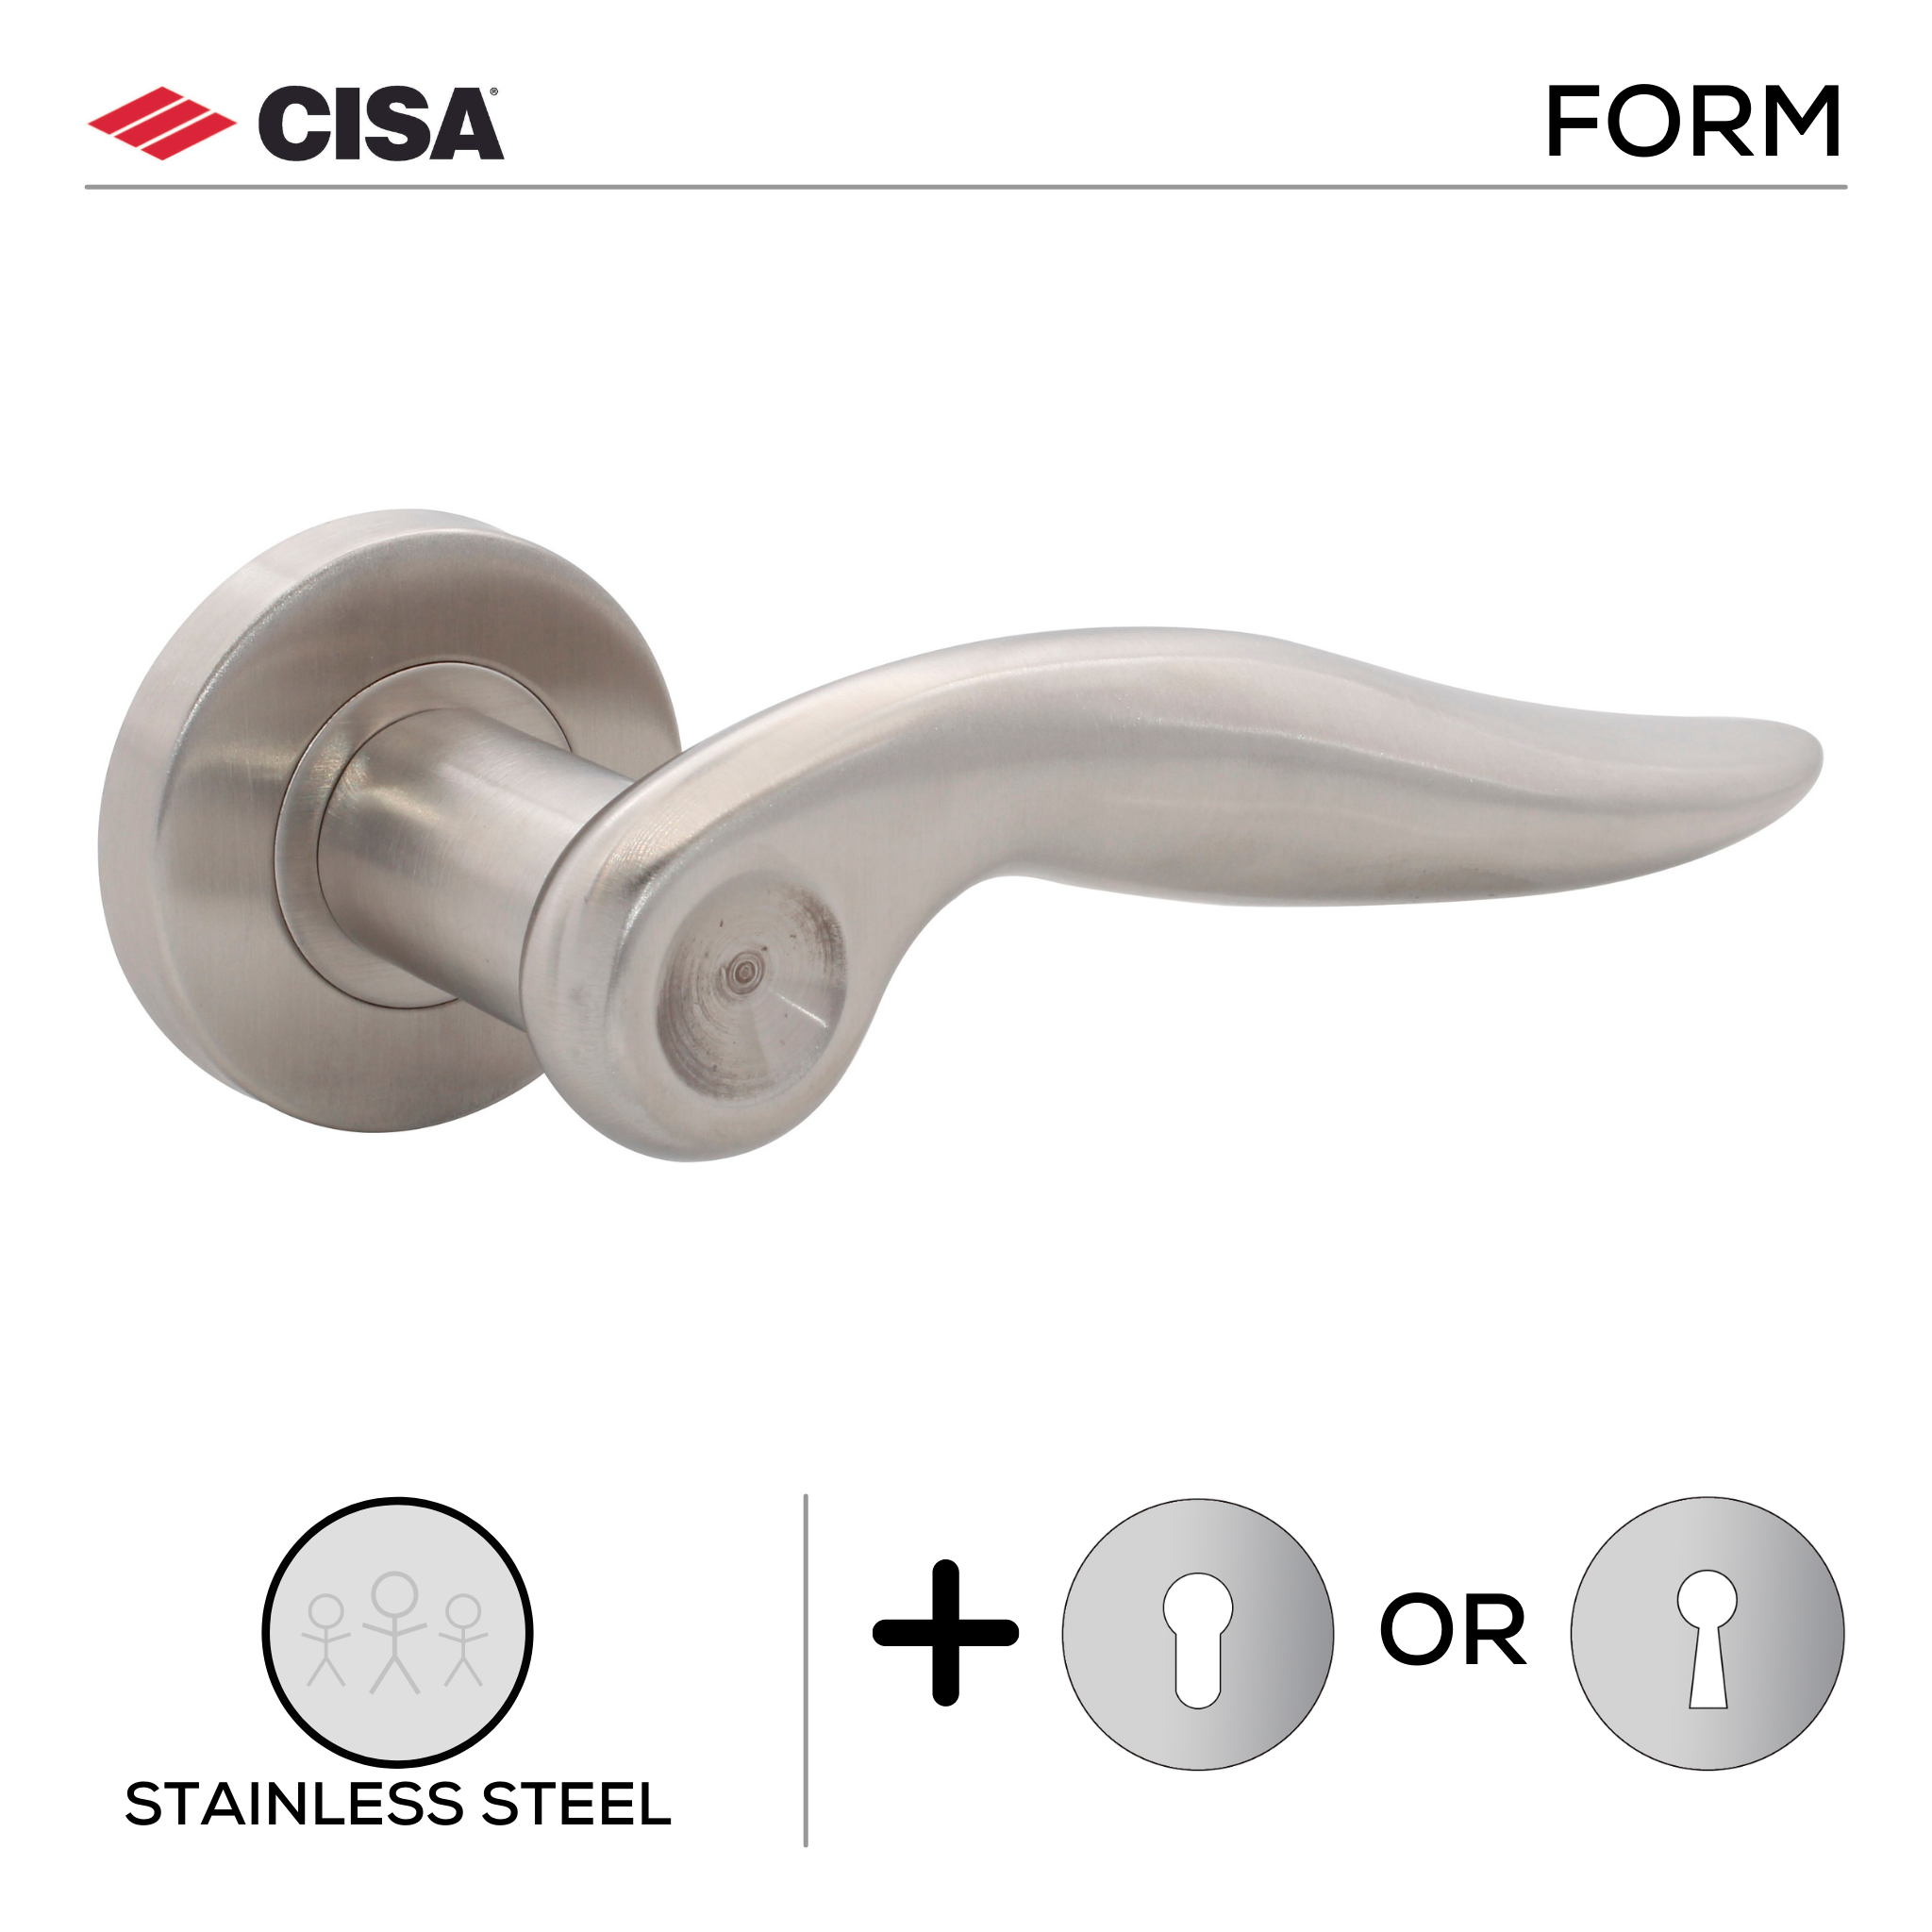 FS110.R._.SS, Lever Handles, Form, On Round Rose, With Escutcheons, Stainless Steel, CISA